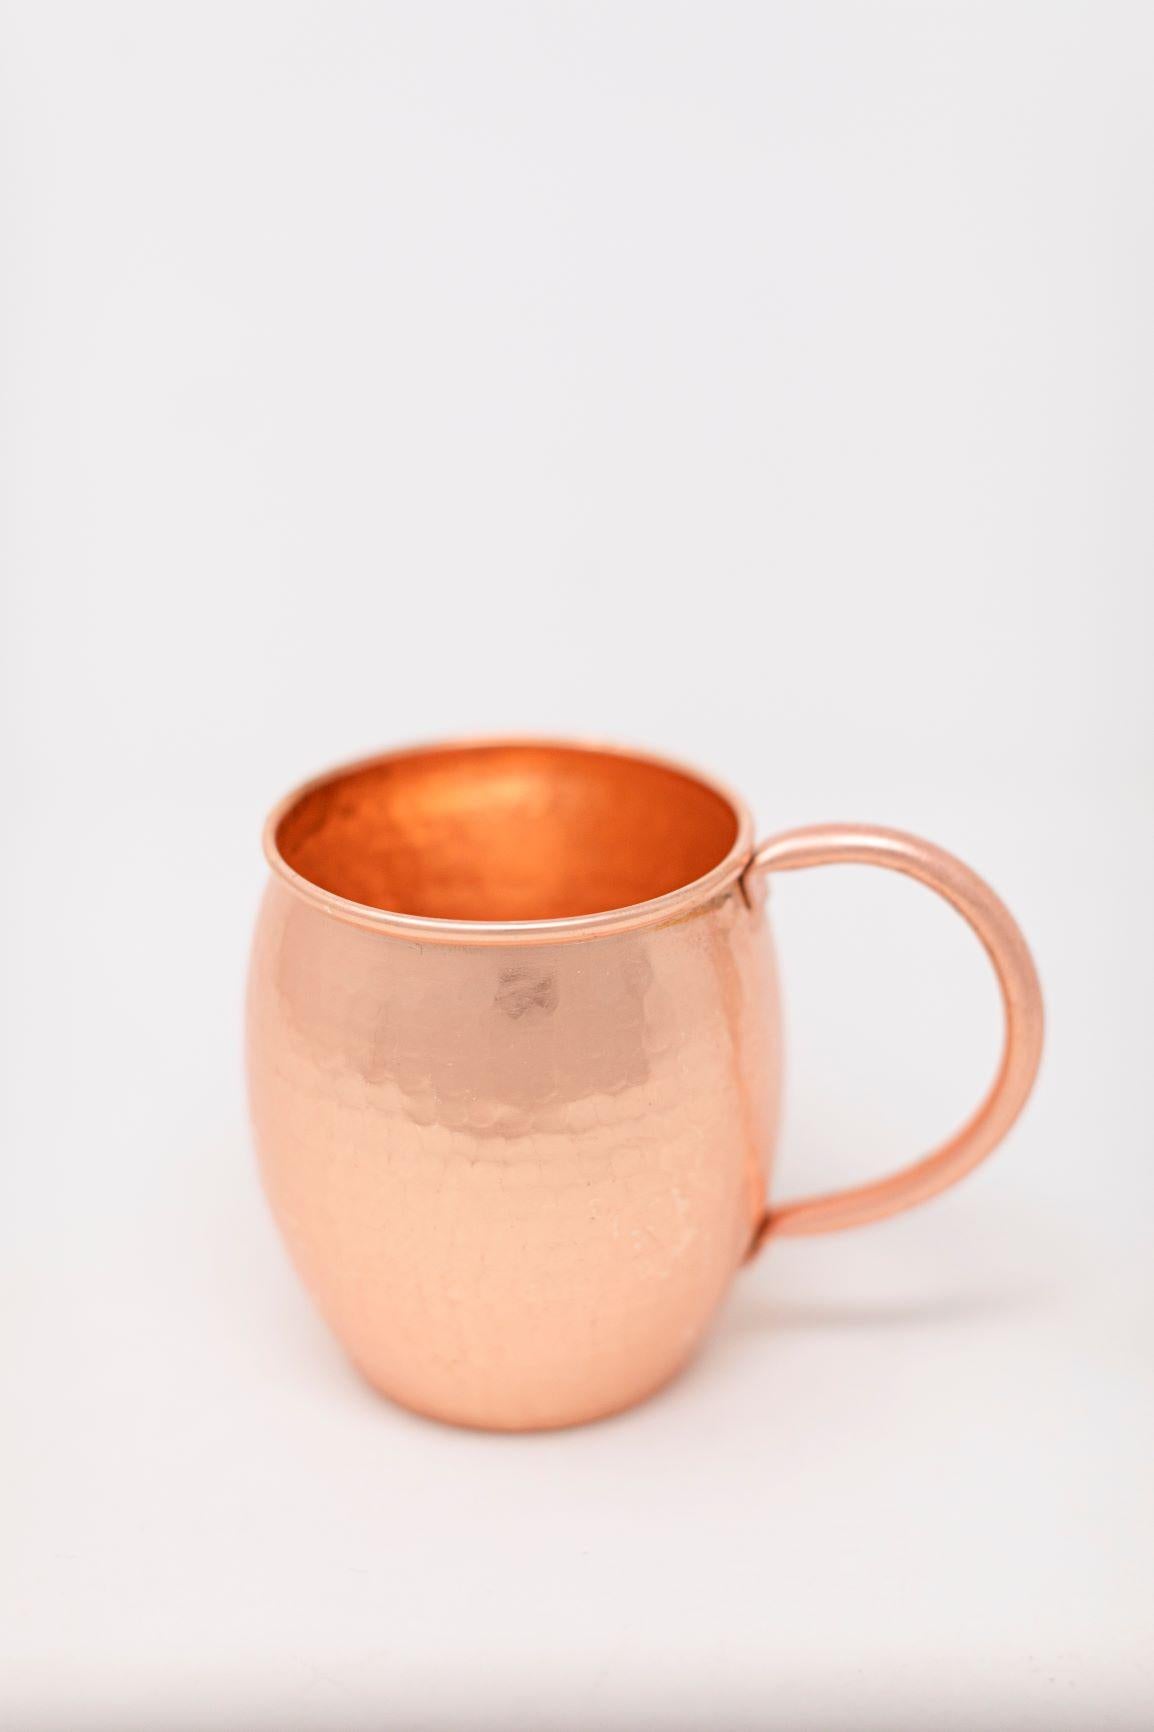 If you're looking for a truly unique and authentic copper Moscow Mule mug, consider purchasing one that has been handmade using traditional techniques by skilled Mexican artisans. These craftsmen have been working with copper for generations and